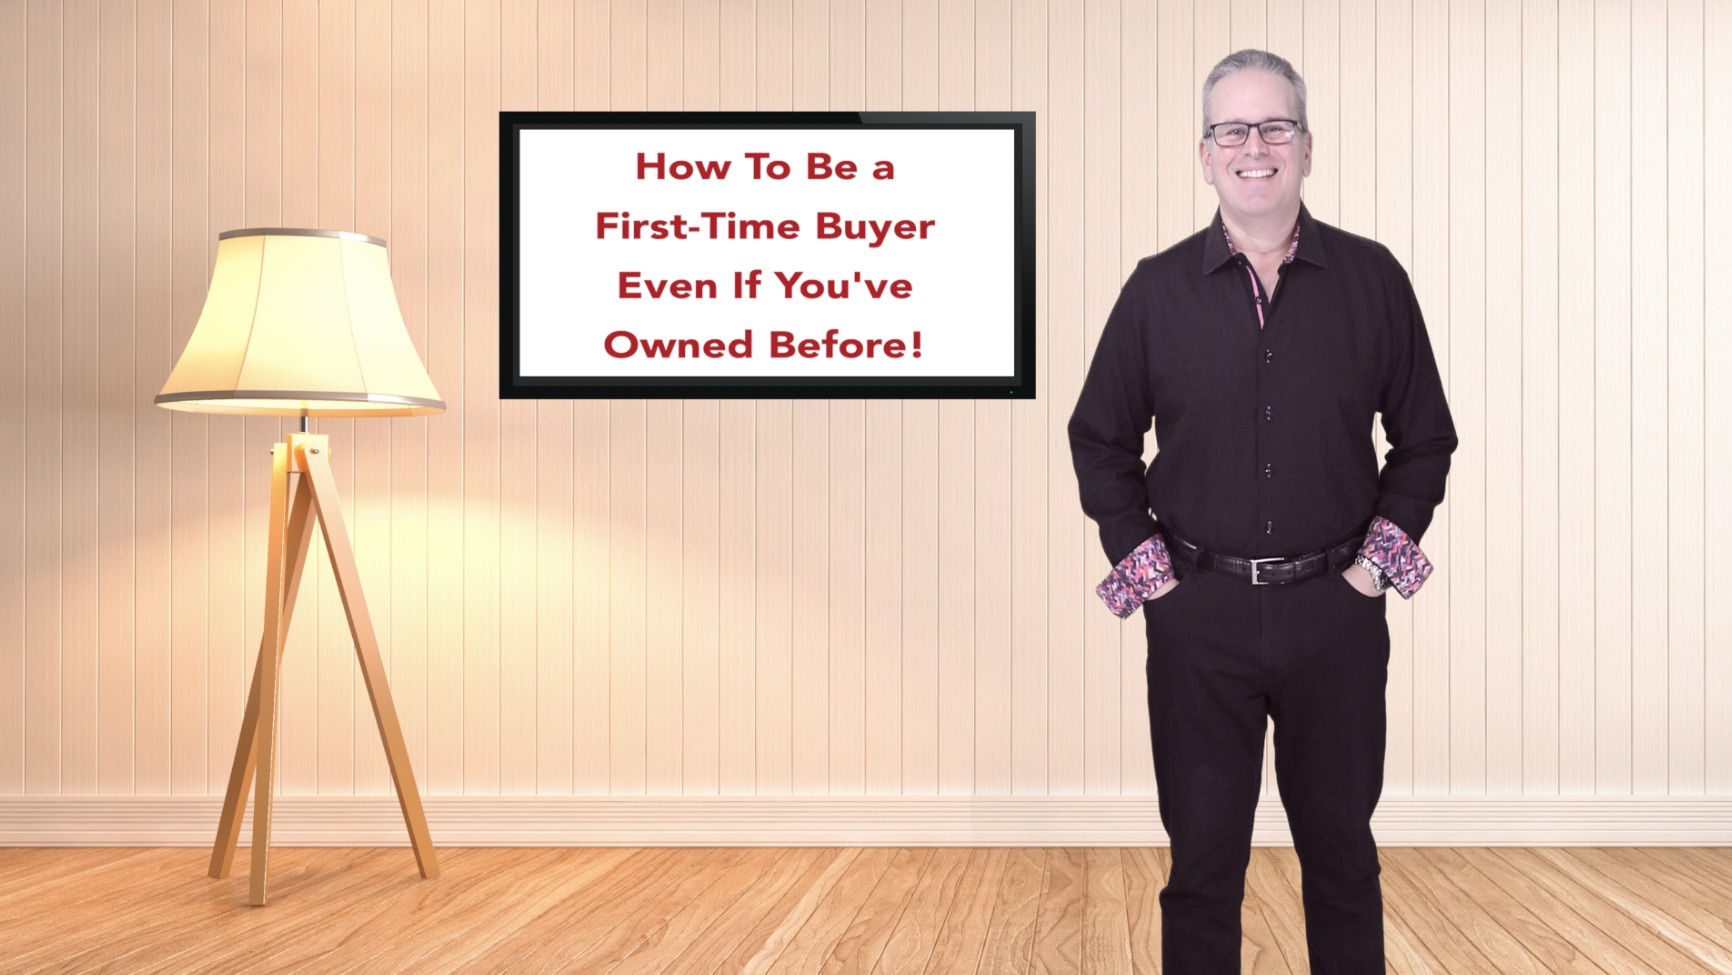 How To Be a First-Time Buyer Even If You’ve Owned Before